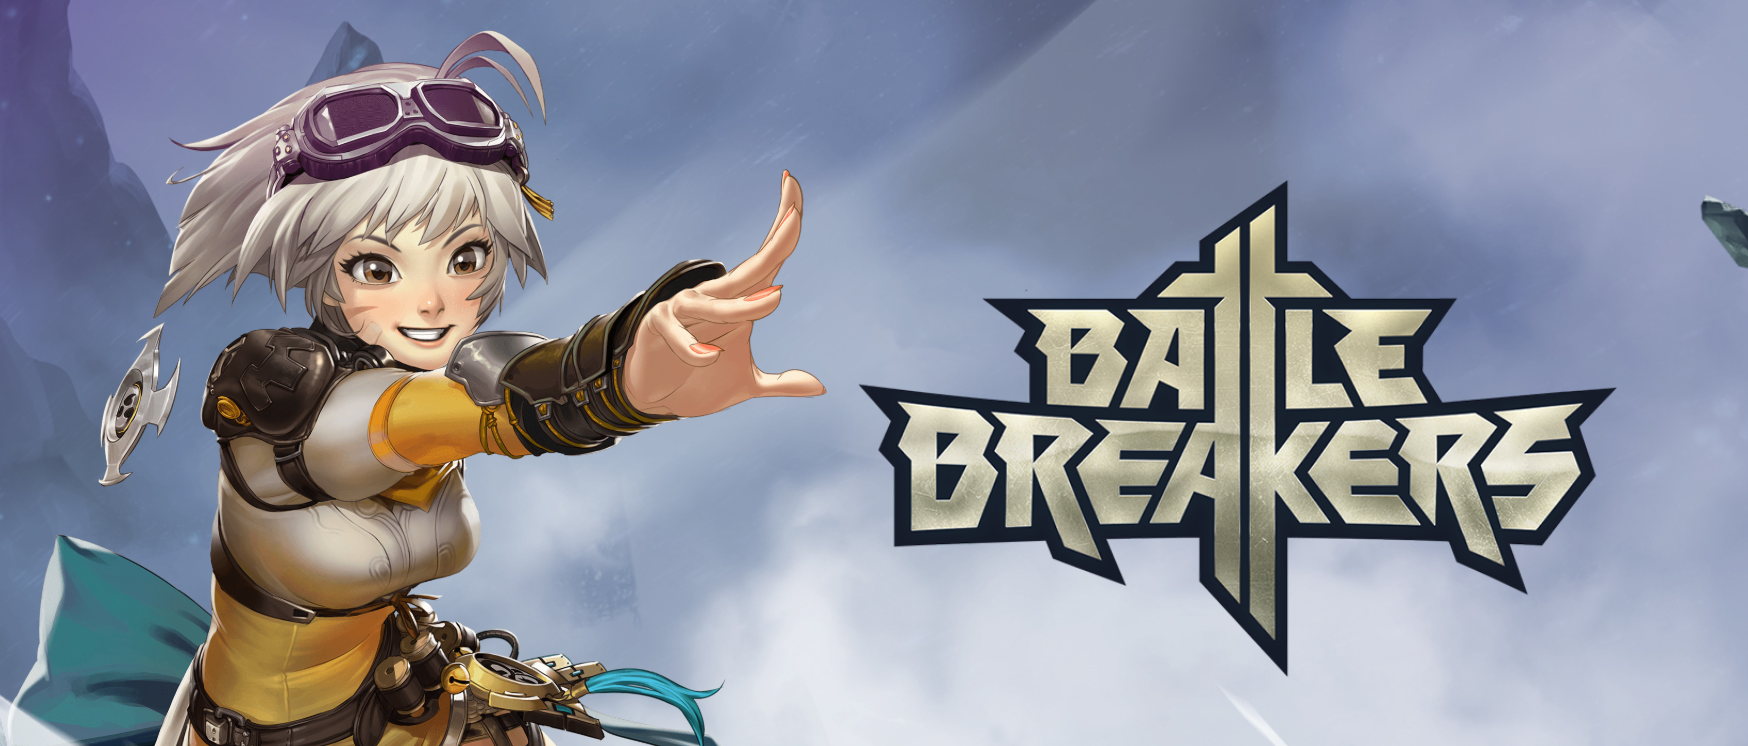 Fortnite creator launches new Battle Breakers mobile game ... - 